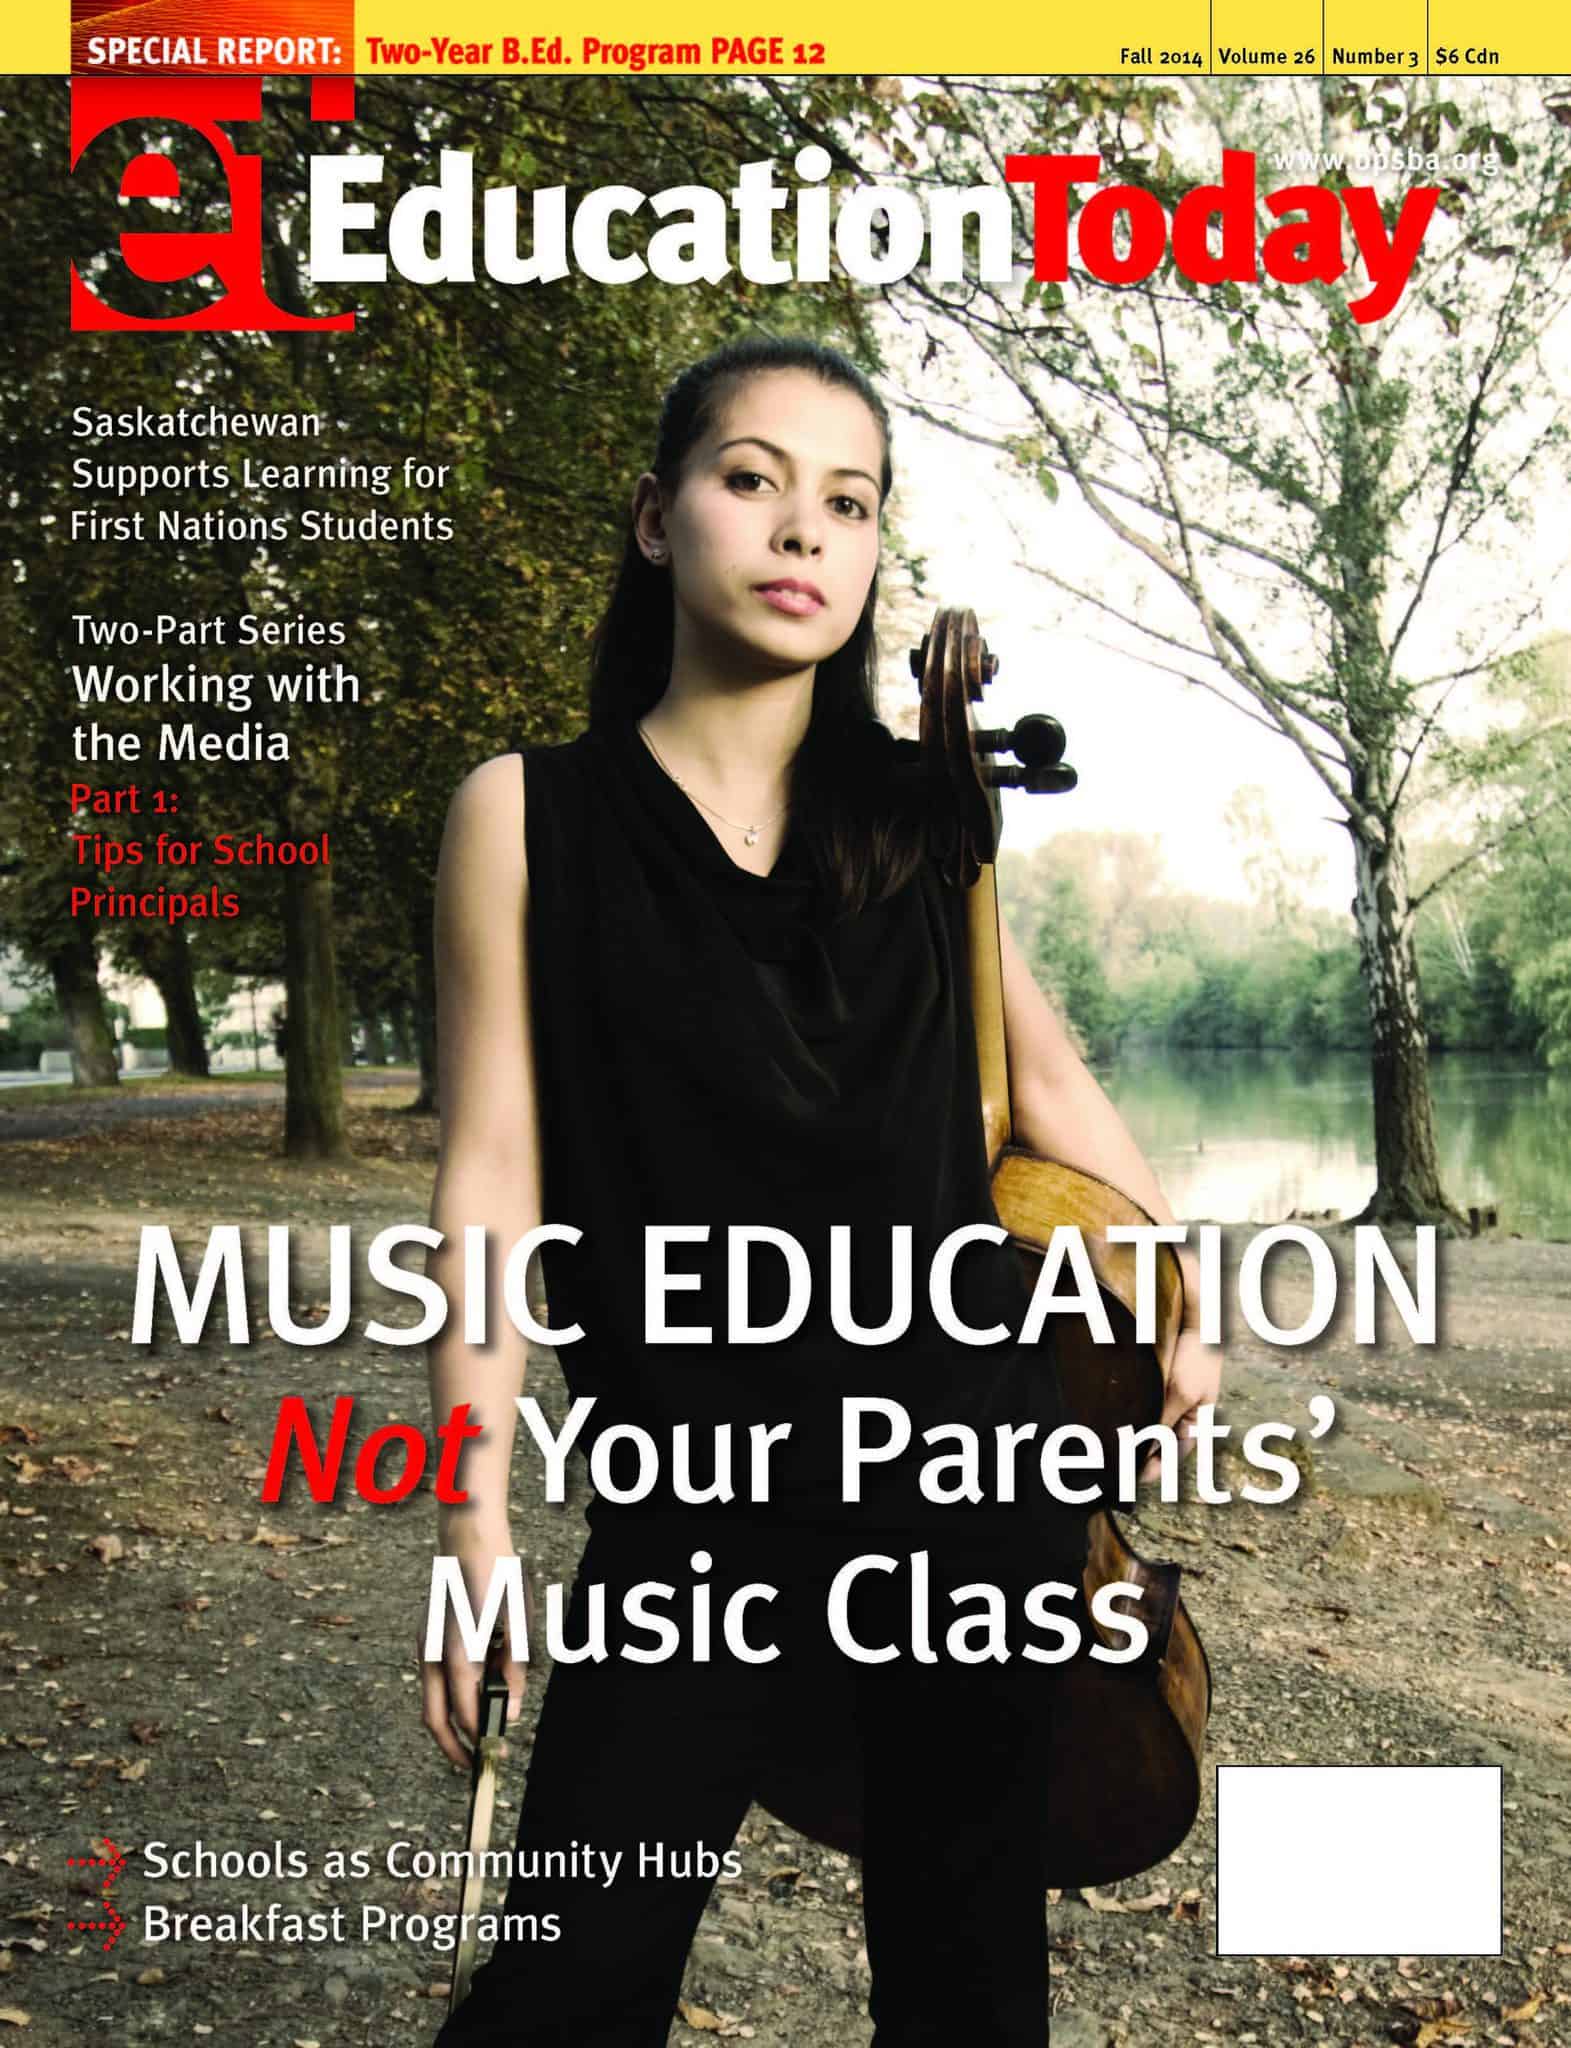 Education Today | Fall 2014 | Volume 26 Number 3